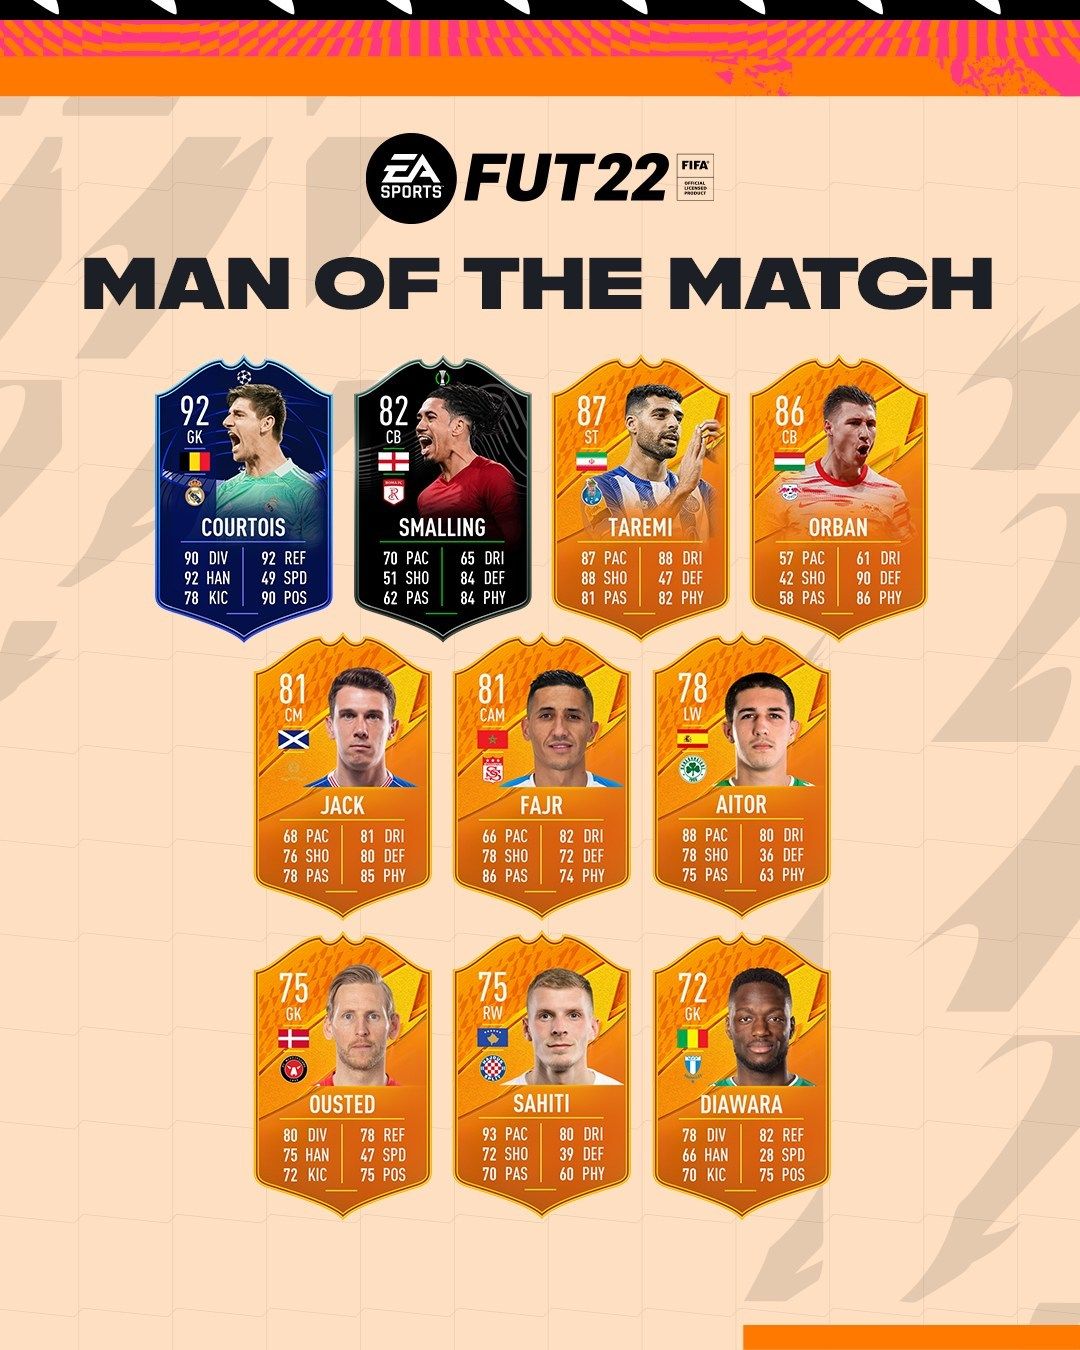 FIFA 22 Ultimate Team Champions League HERO arrives in latest batch of Man of the Match cards